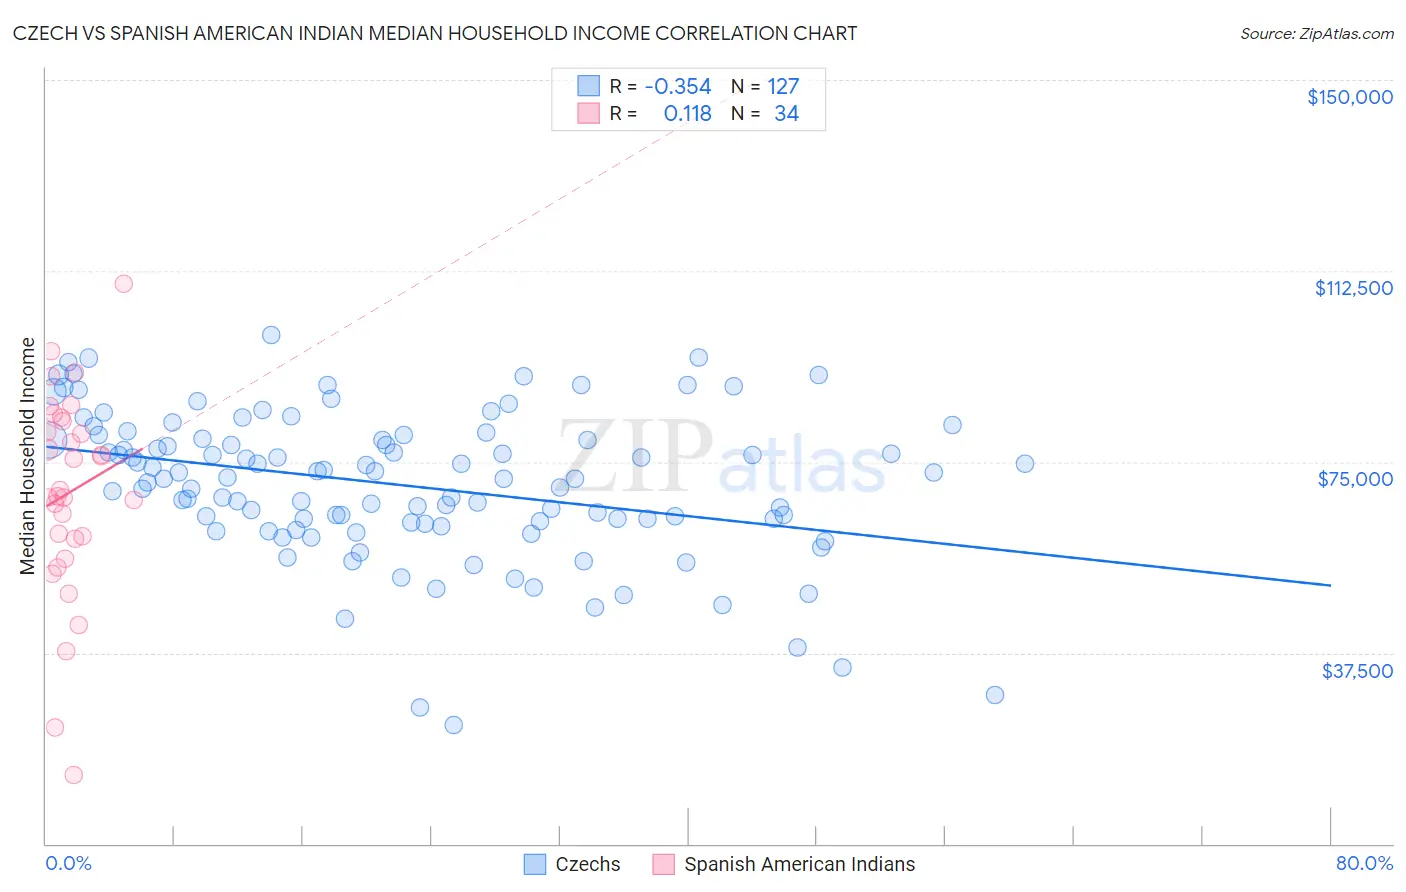 Czech vs Spanish American Indian Median Household Income